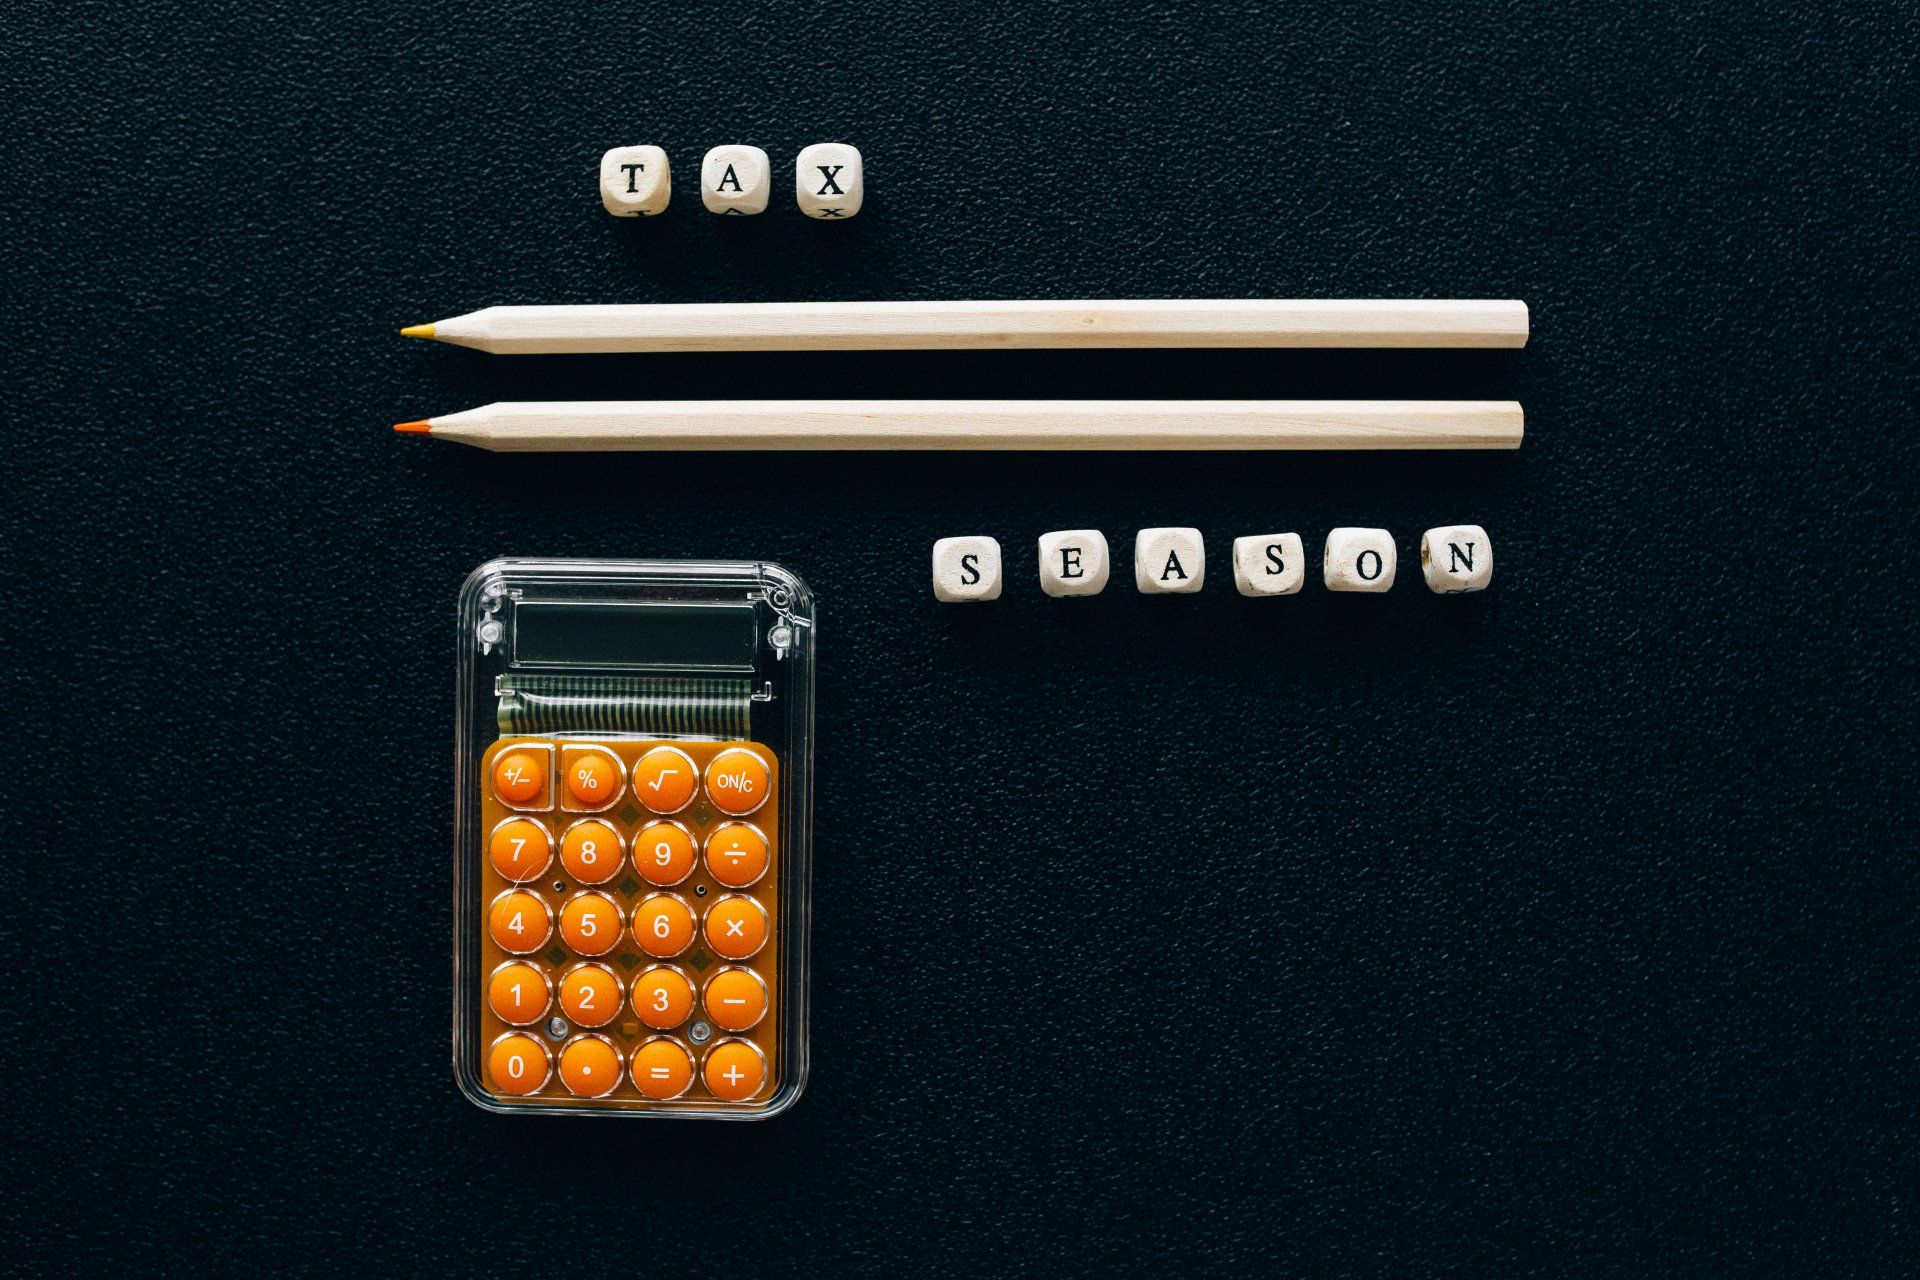 Image of calculator and pencils